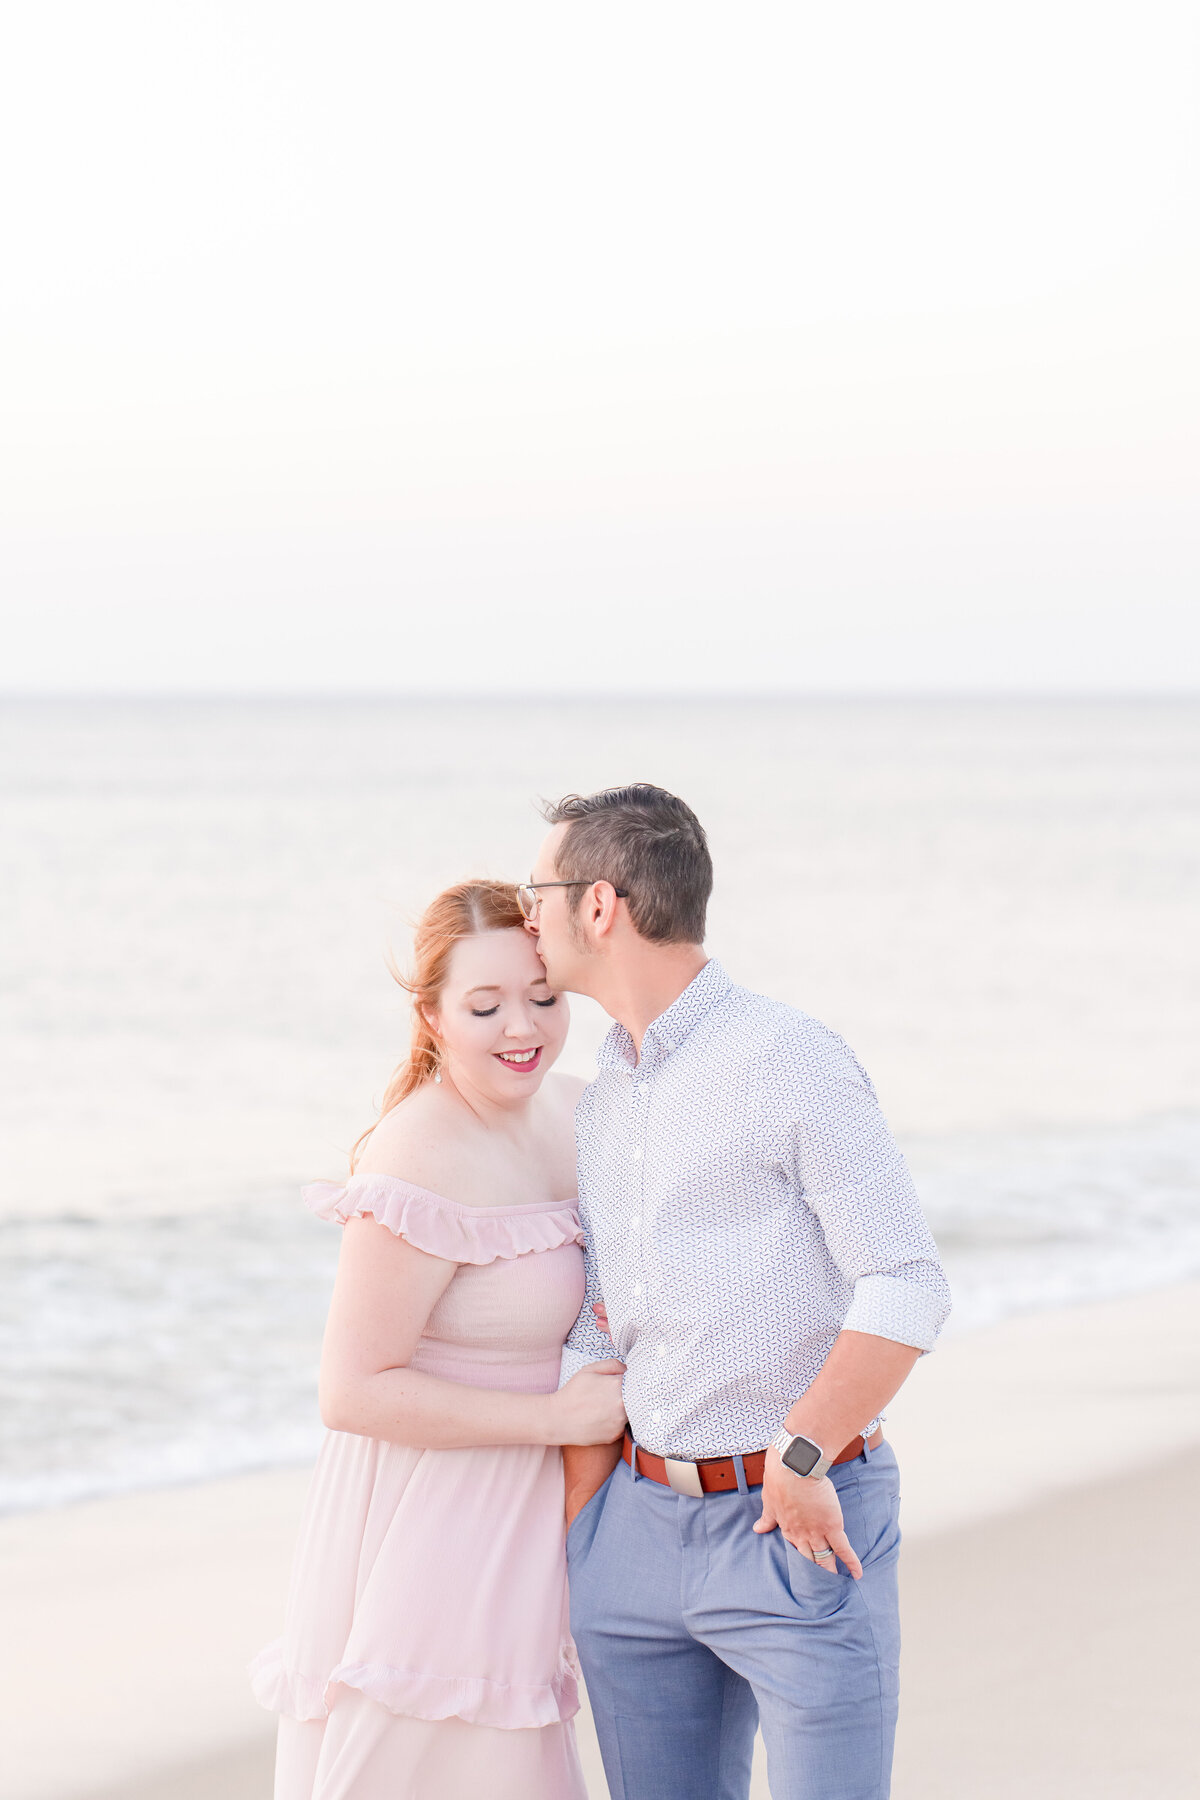 Sunrise-beach-engagement-session-in-indiana